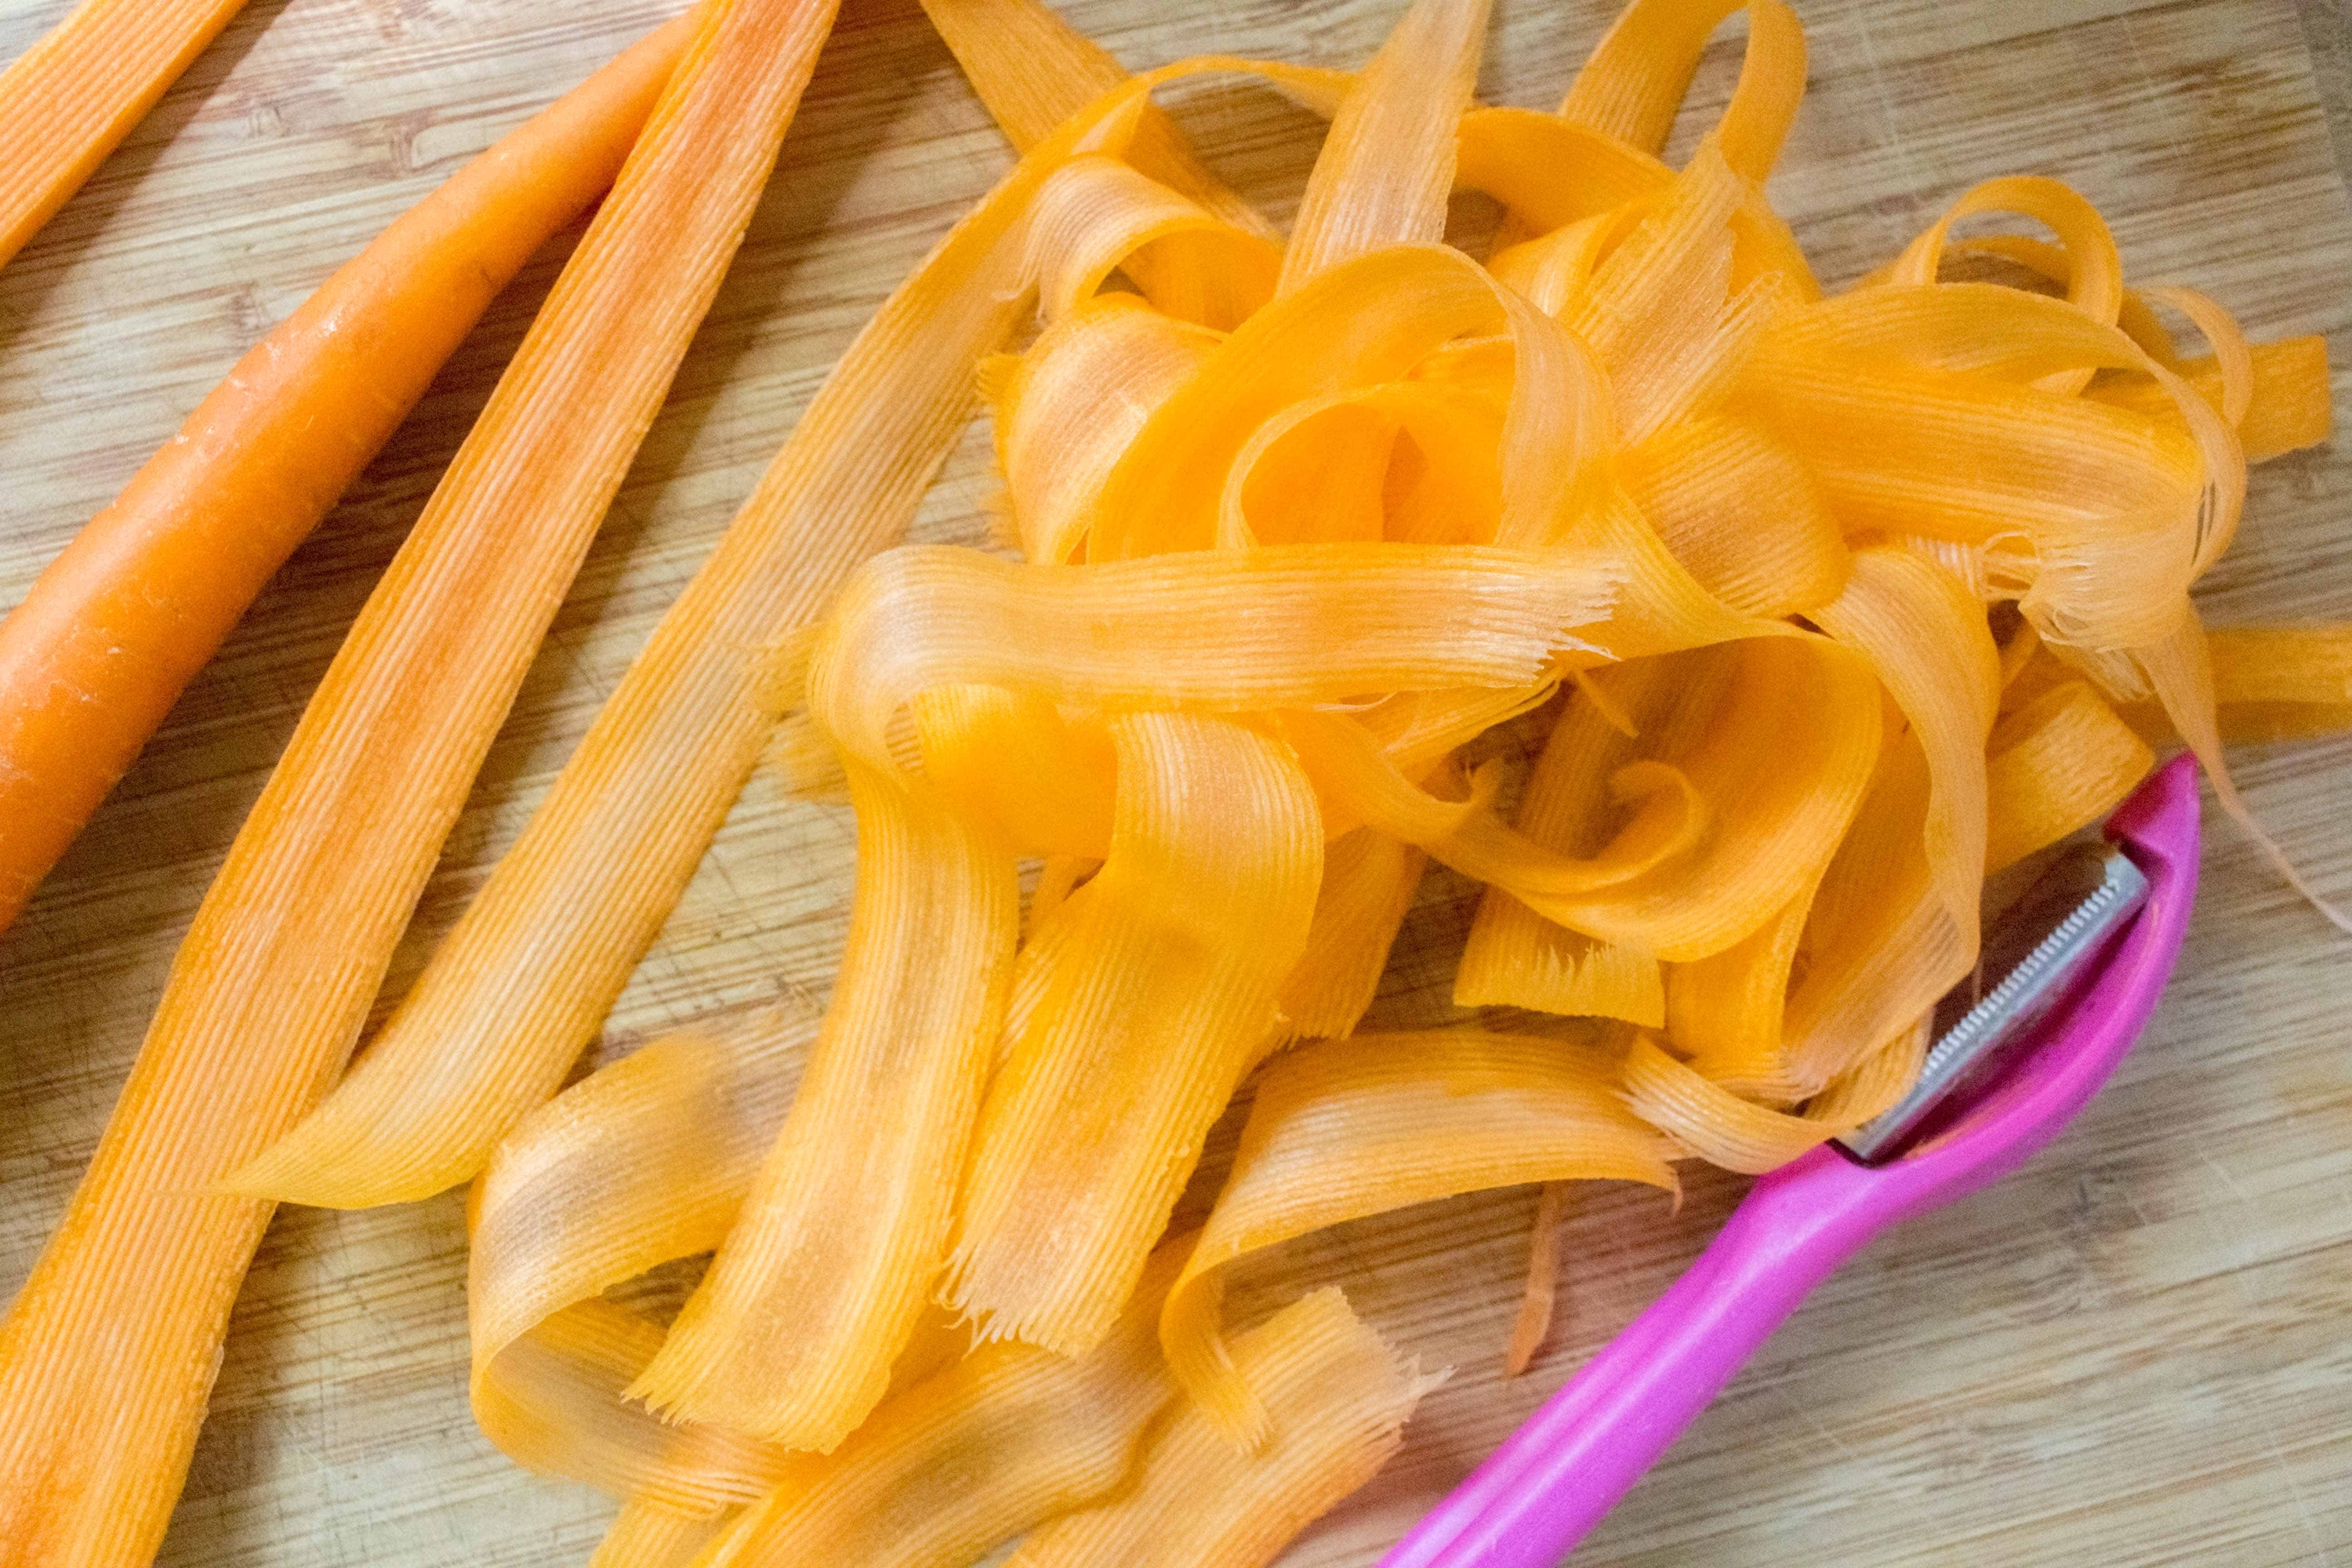 Need some pickled carrots quickly? Here's an easy Quick Pickled Carrot recipe!